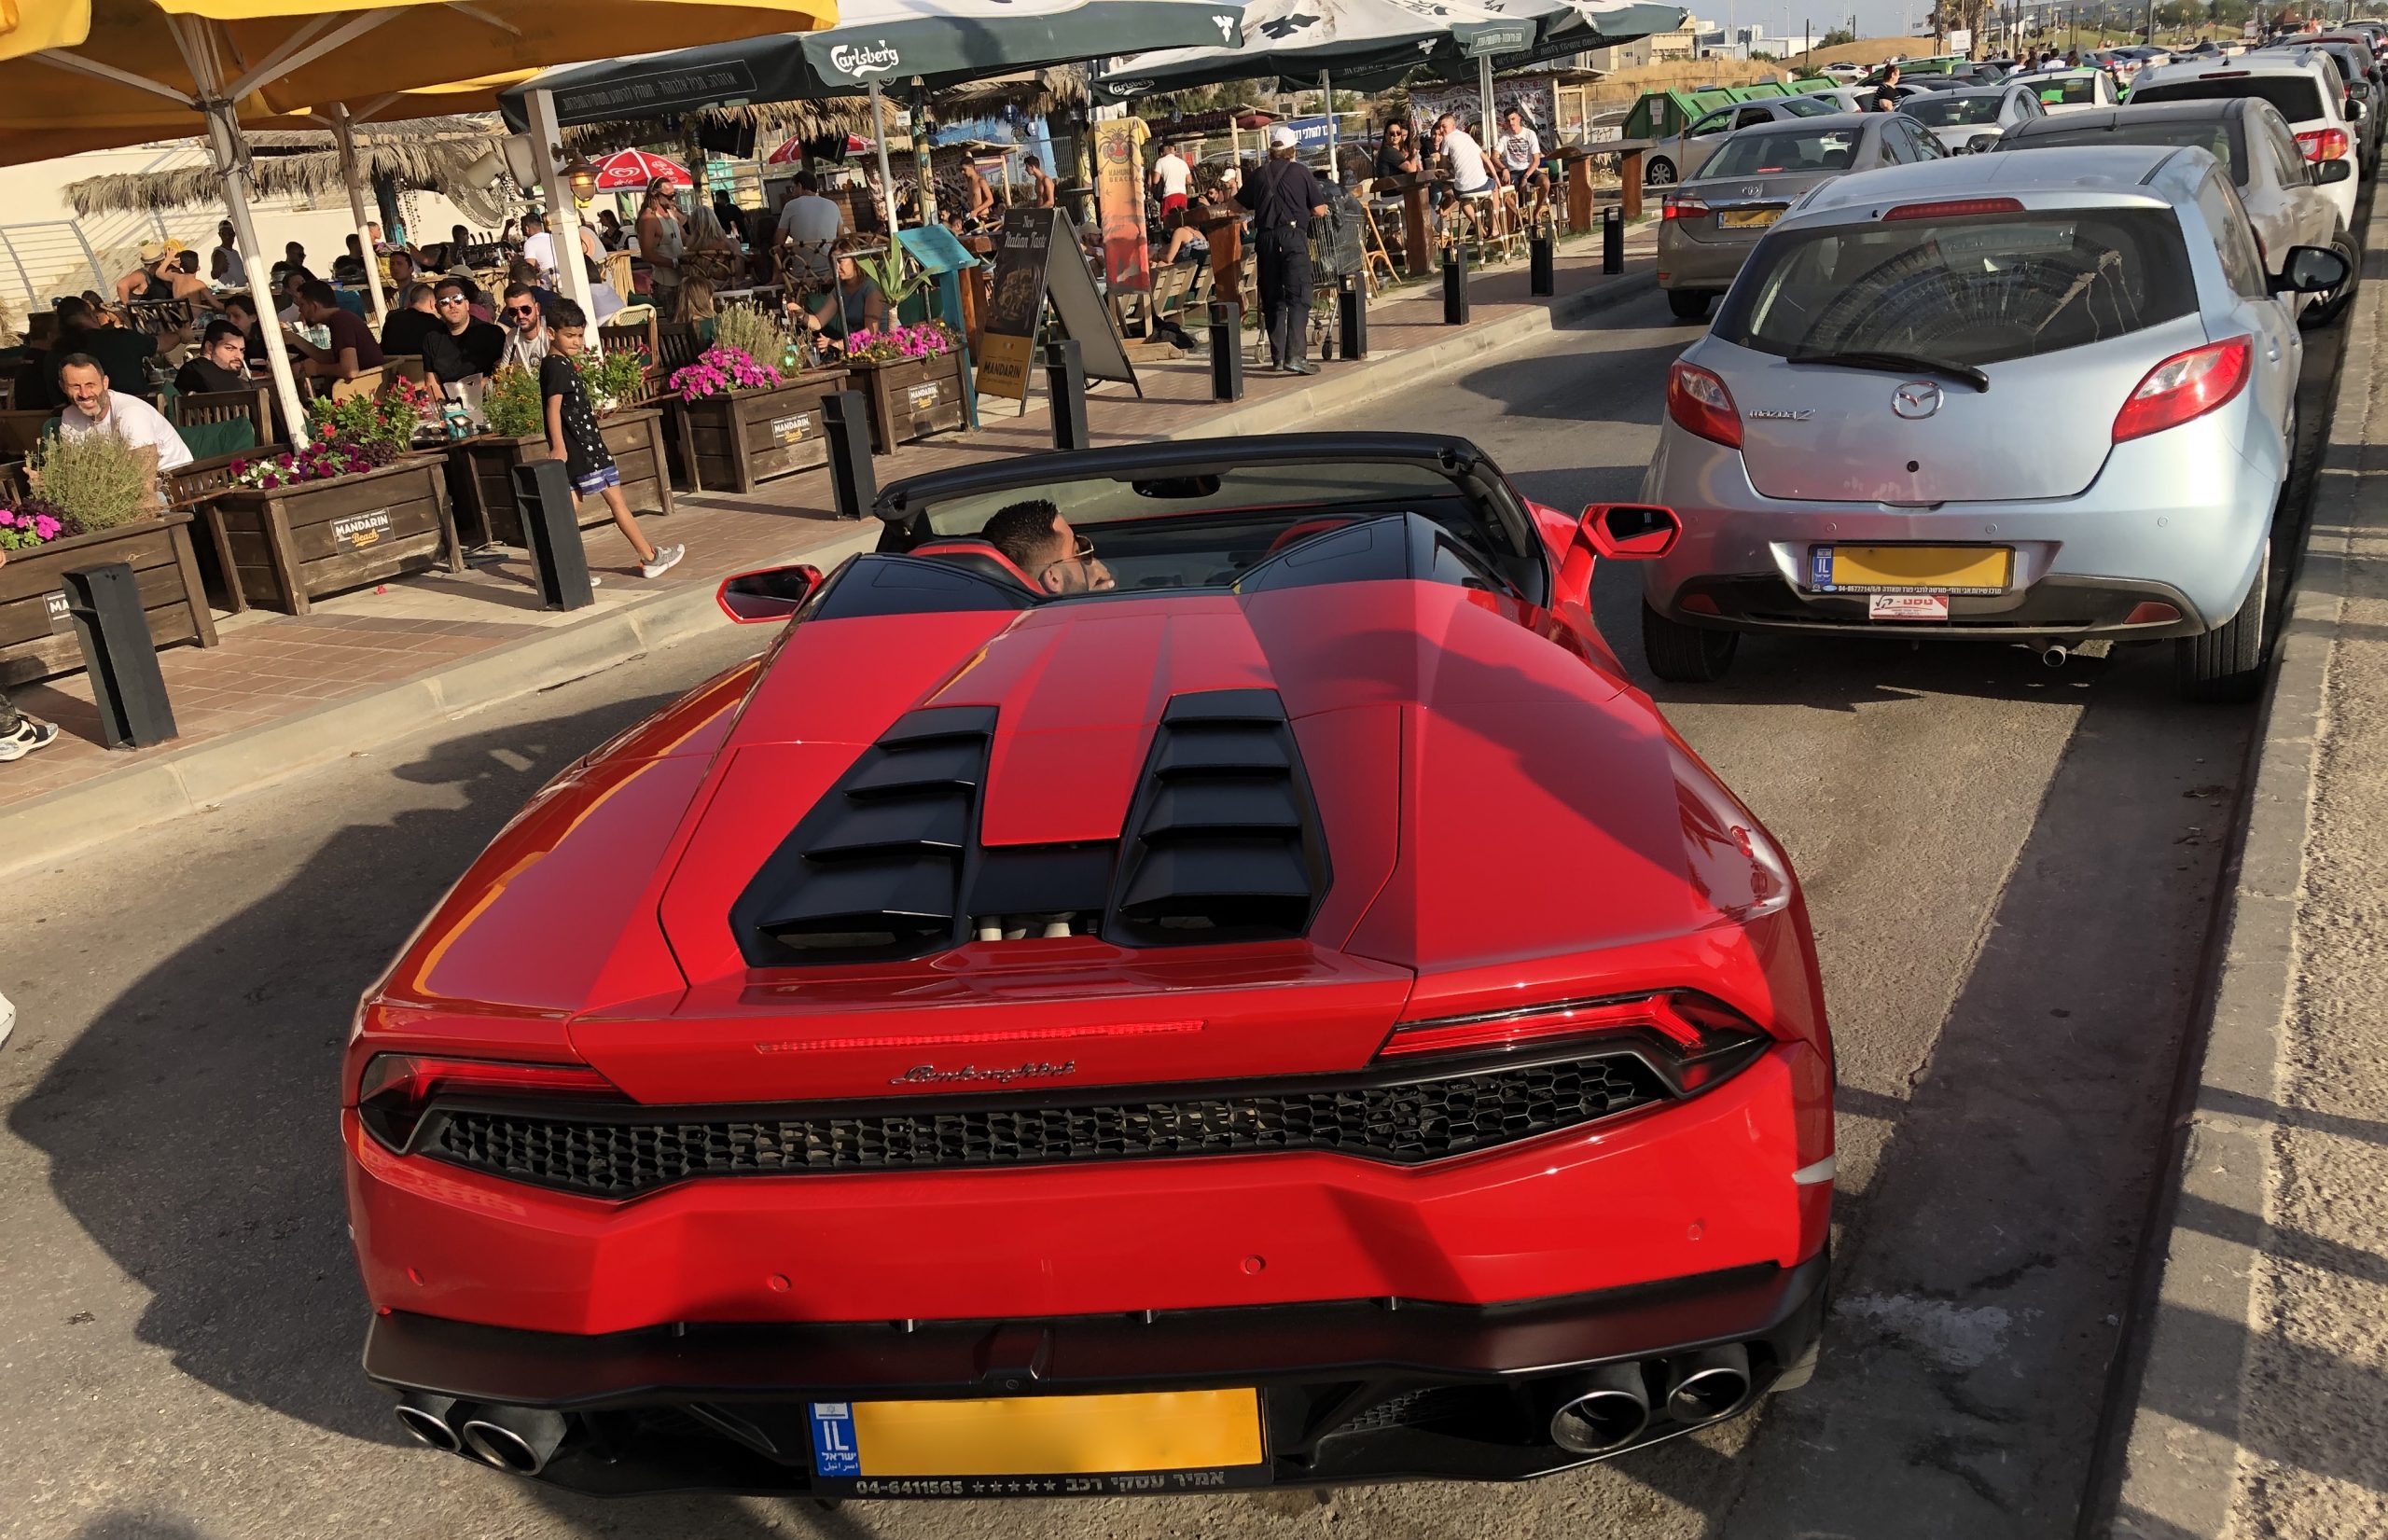 Luxury Cars Becoming a Common View in Israel